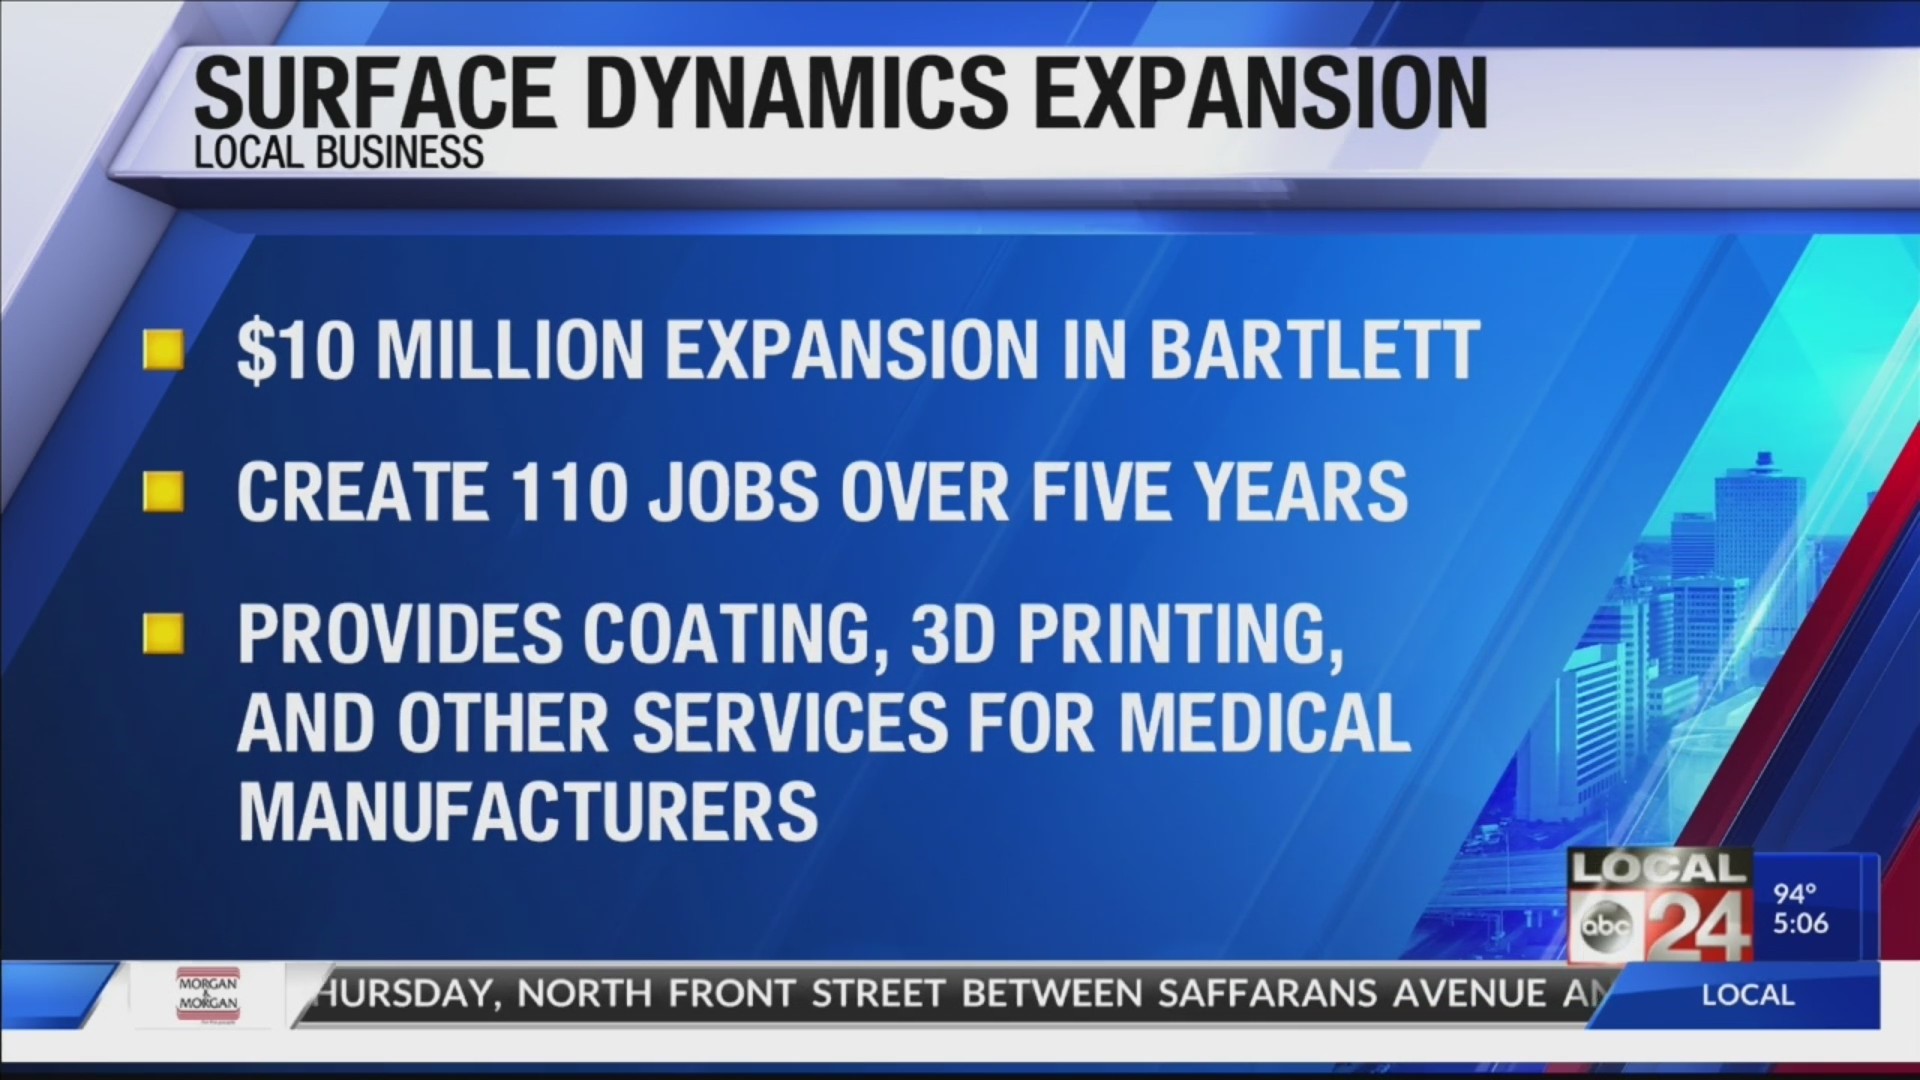 Surface Dynamics to expand operations in Bartlett